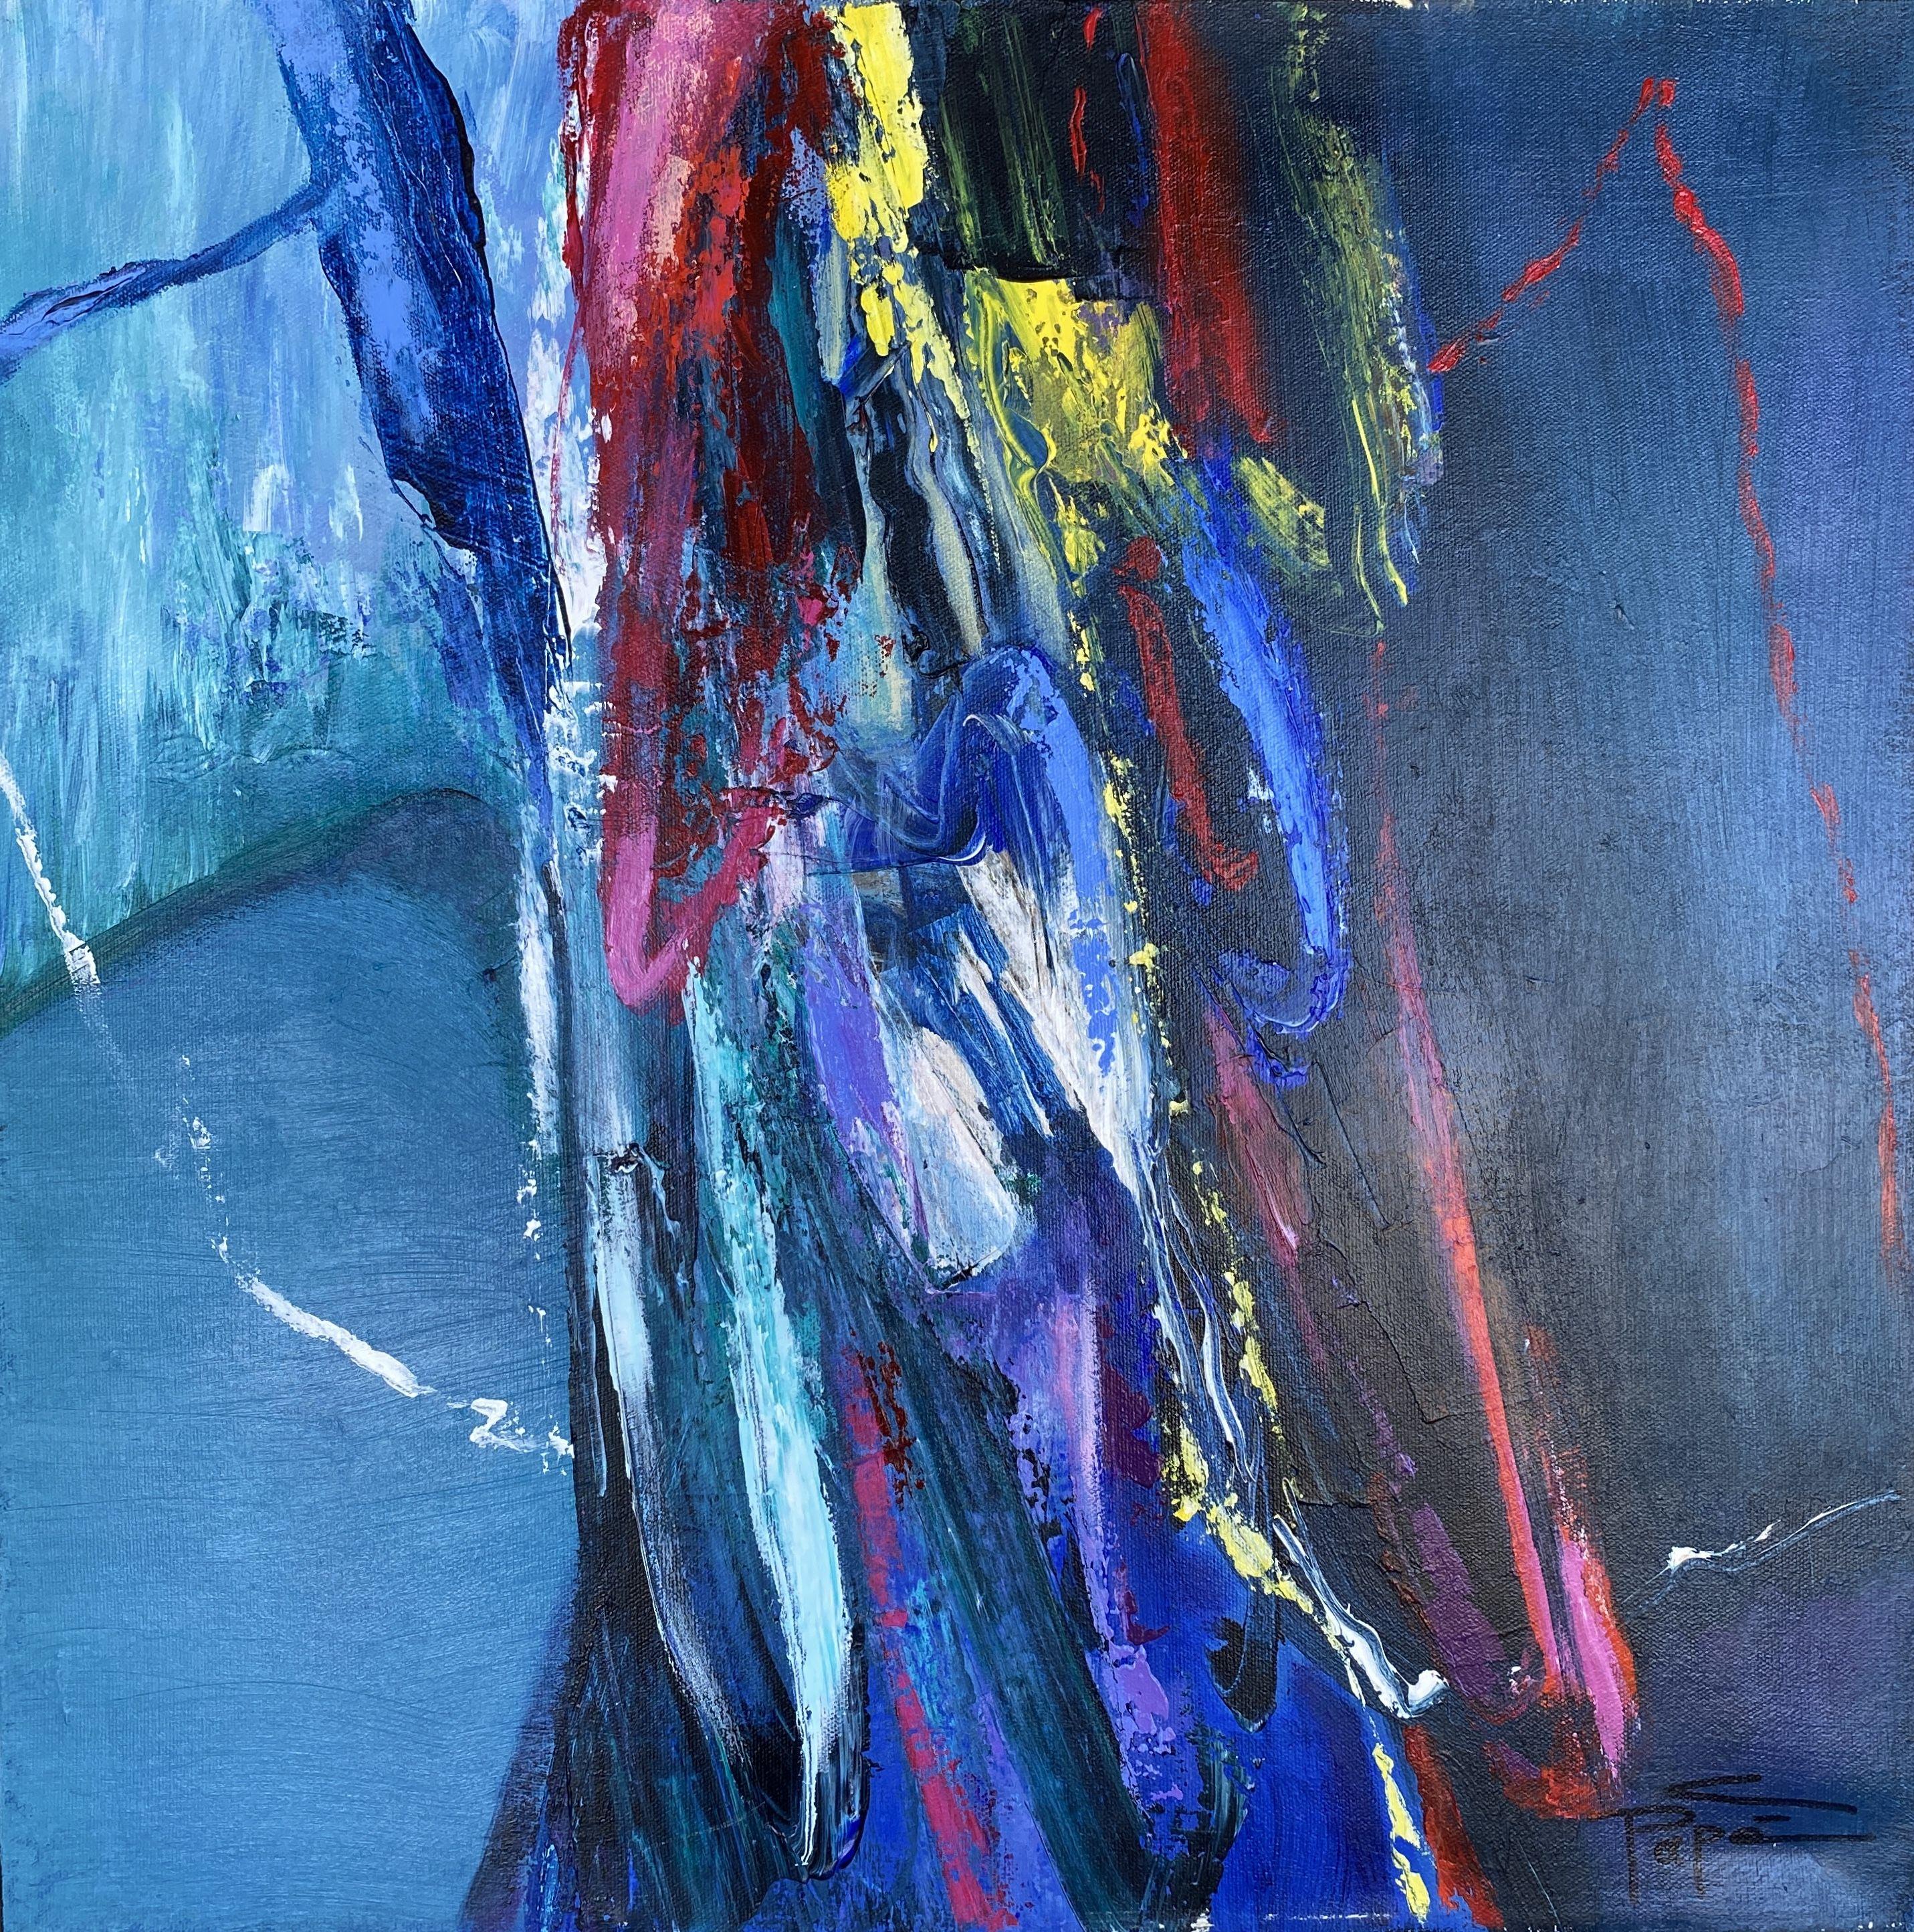 Christiane Pape Abstract Painting - La Grotta di Capril, Painting, Acrylic on Canvas